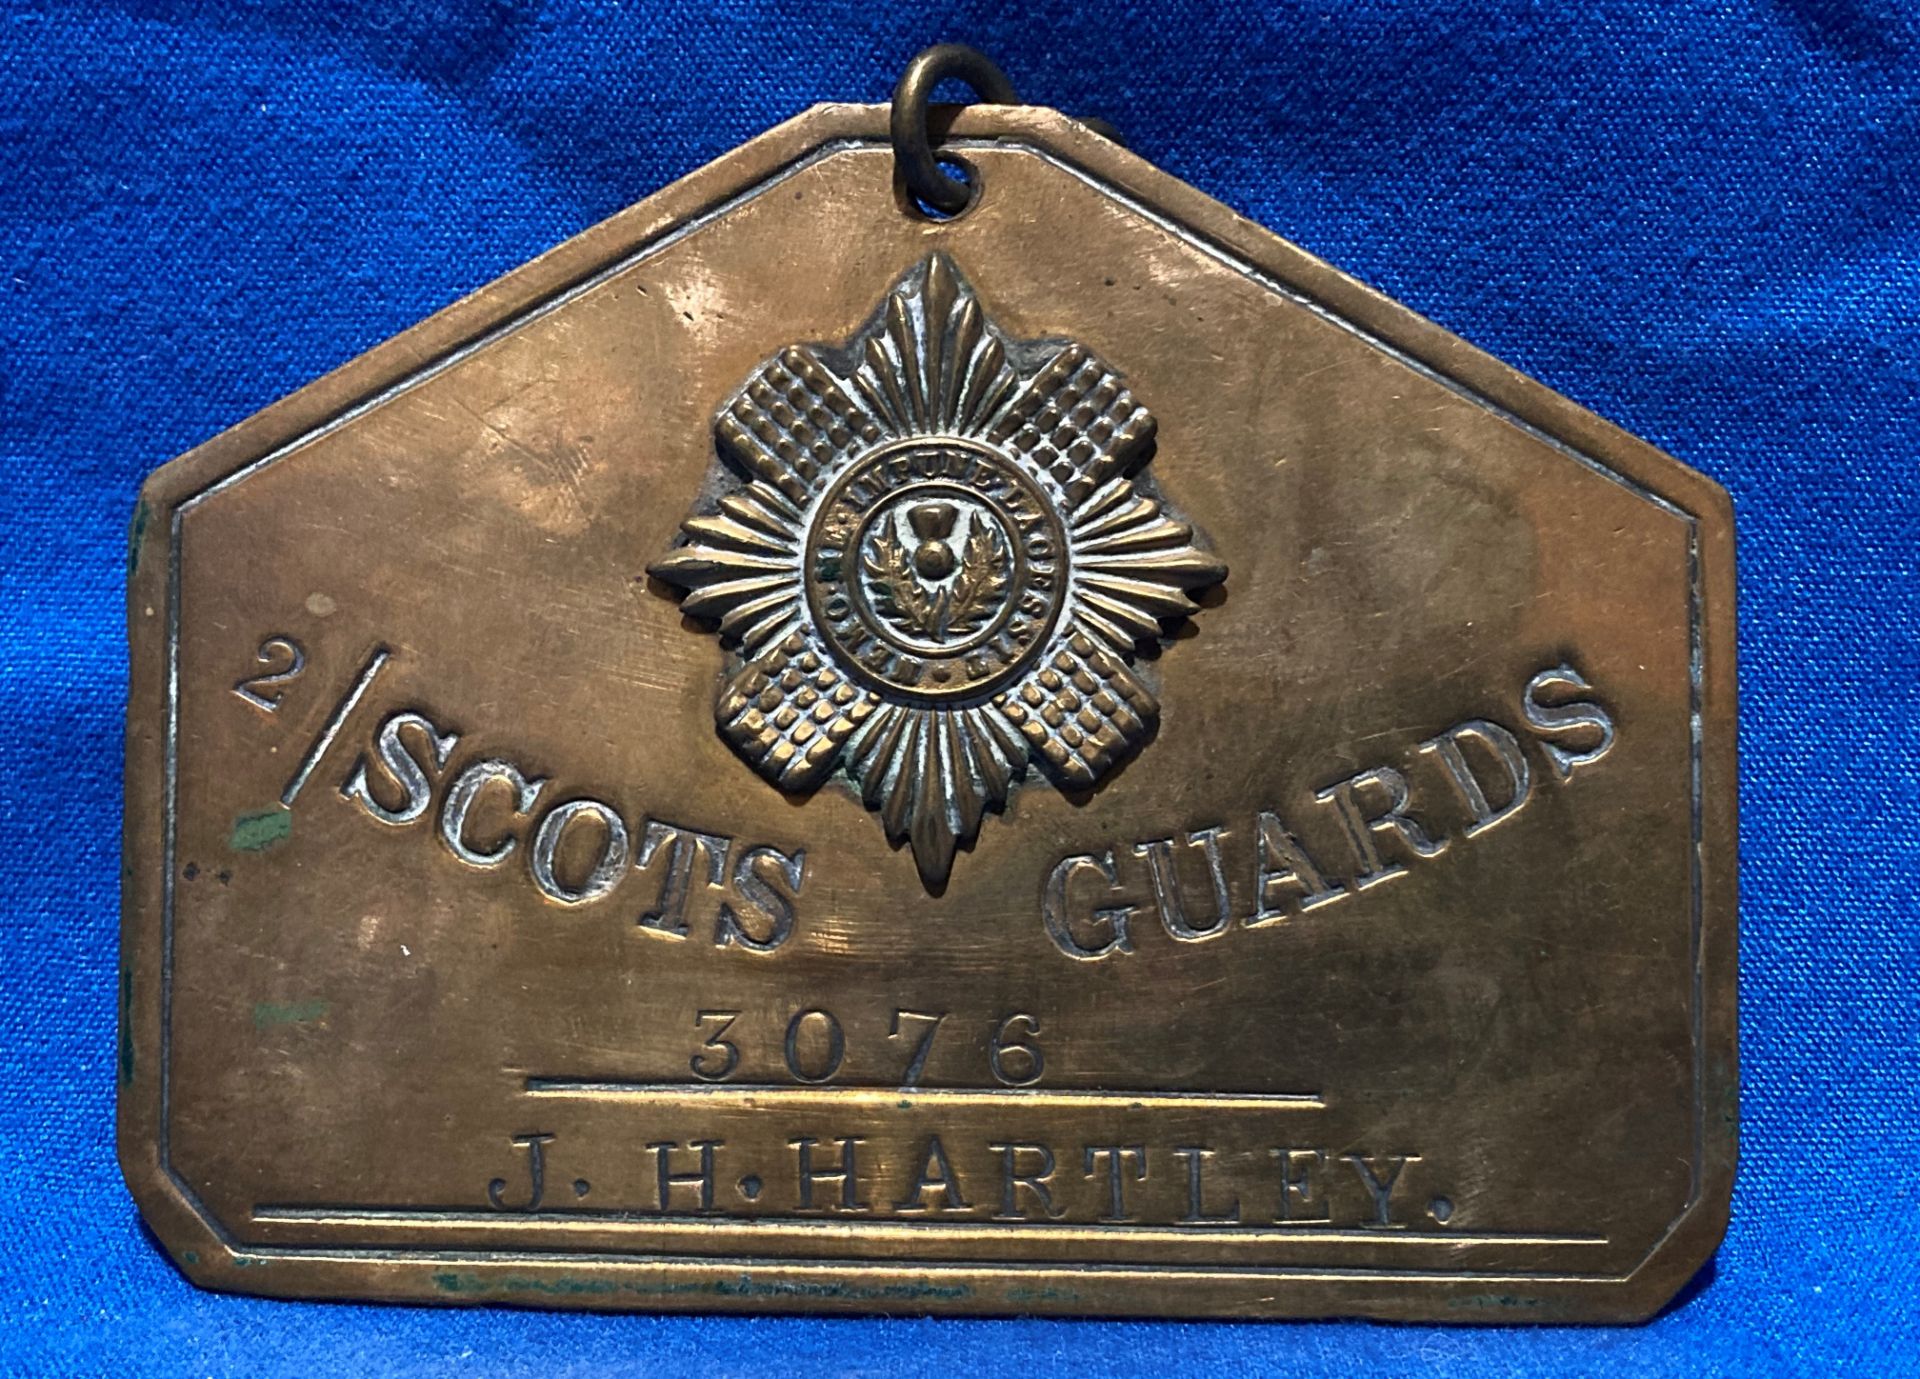 A brass plaque 2/Scots Guards 3076 JH Hartley, a baptism card for Gerald Frederick Hartley 1906, - Image 3 of 4